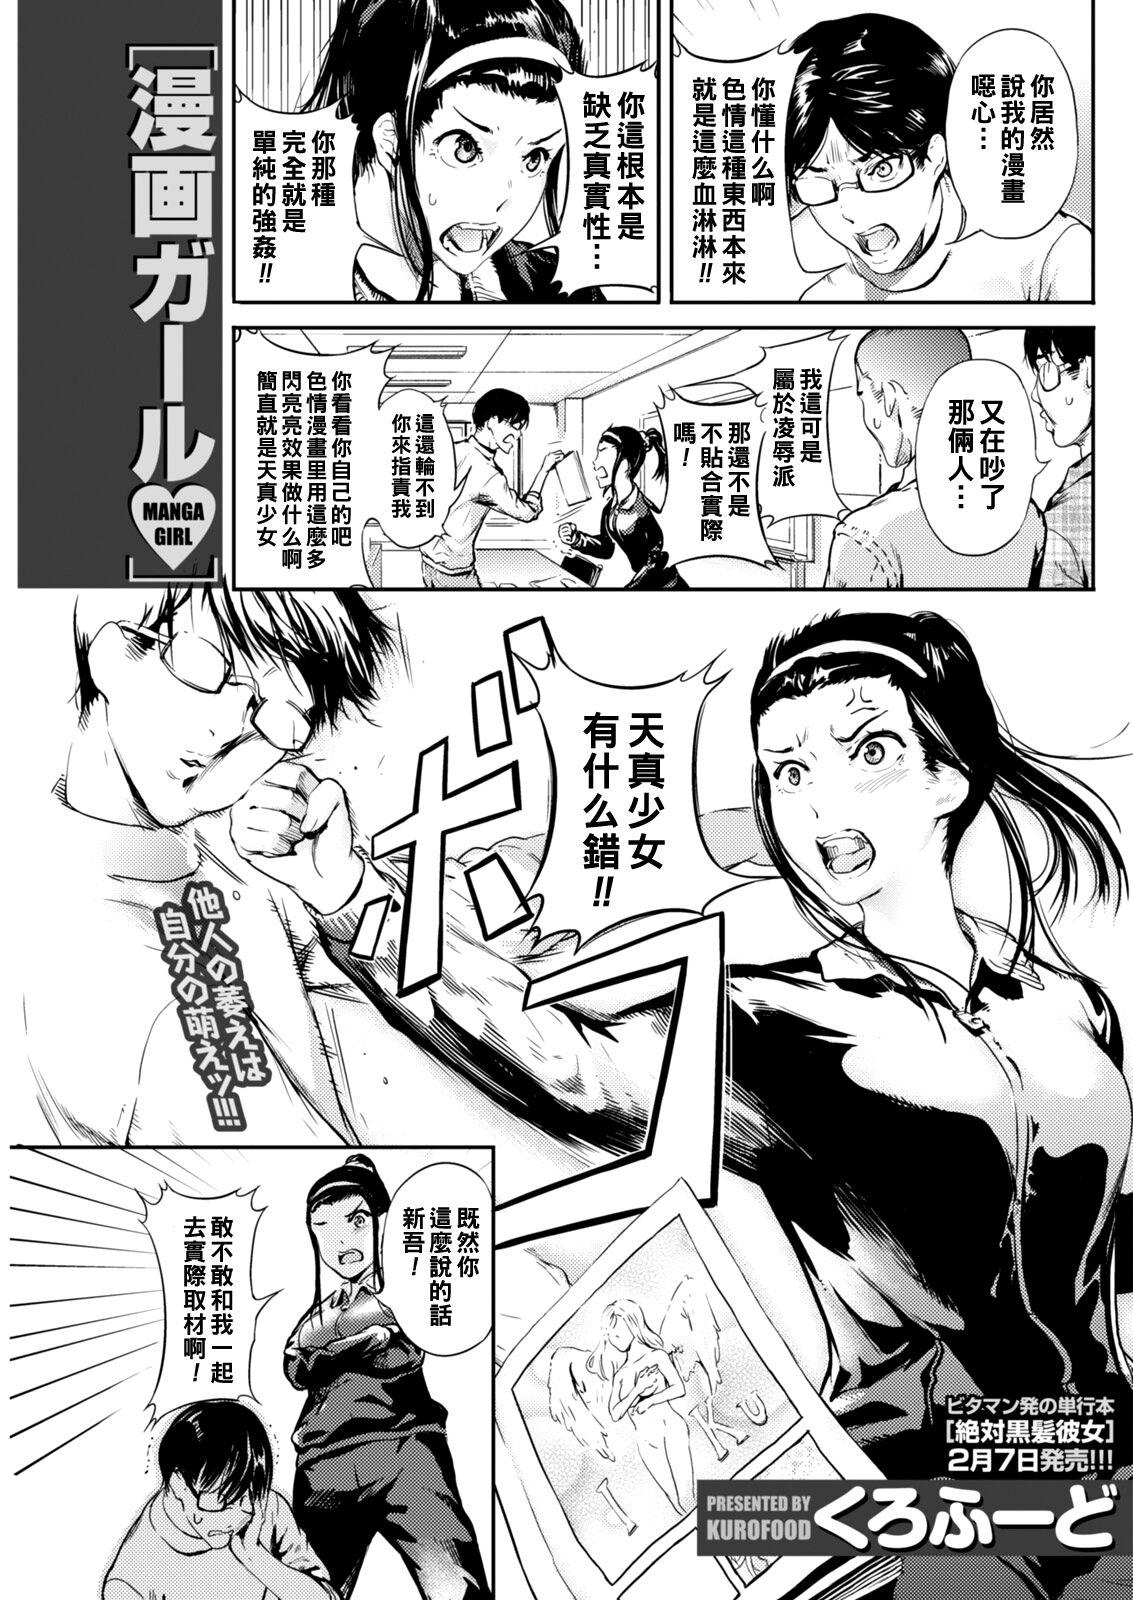 Anal Play 漫画ガール（Chinese） Tanned - Picture 1